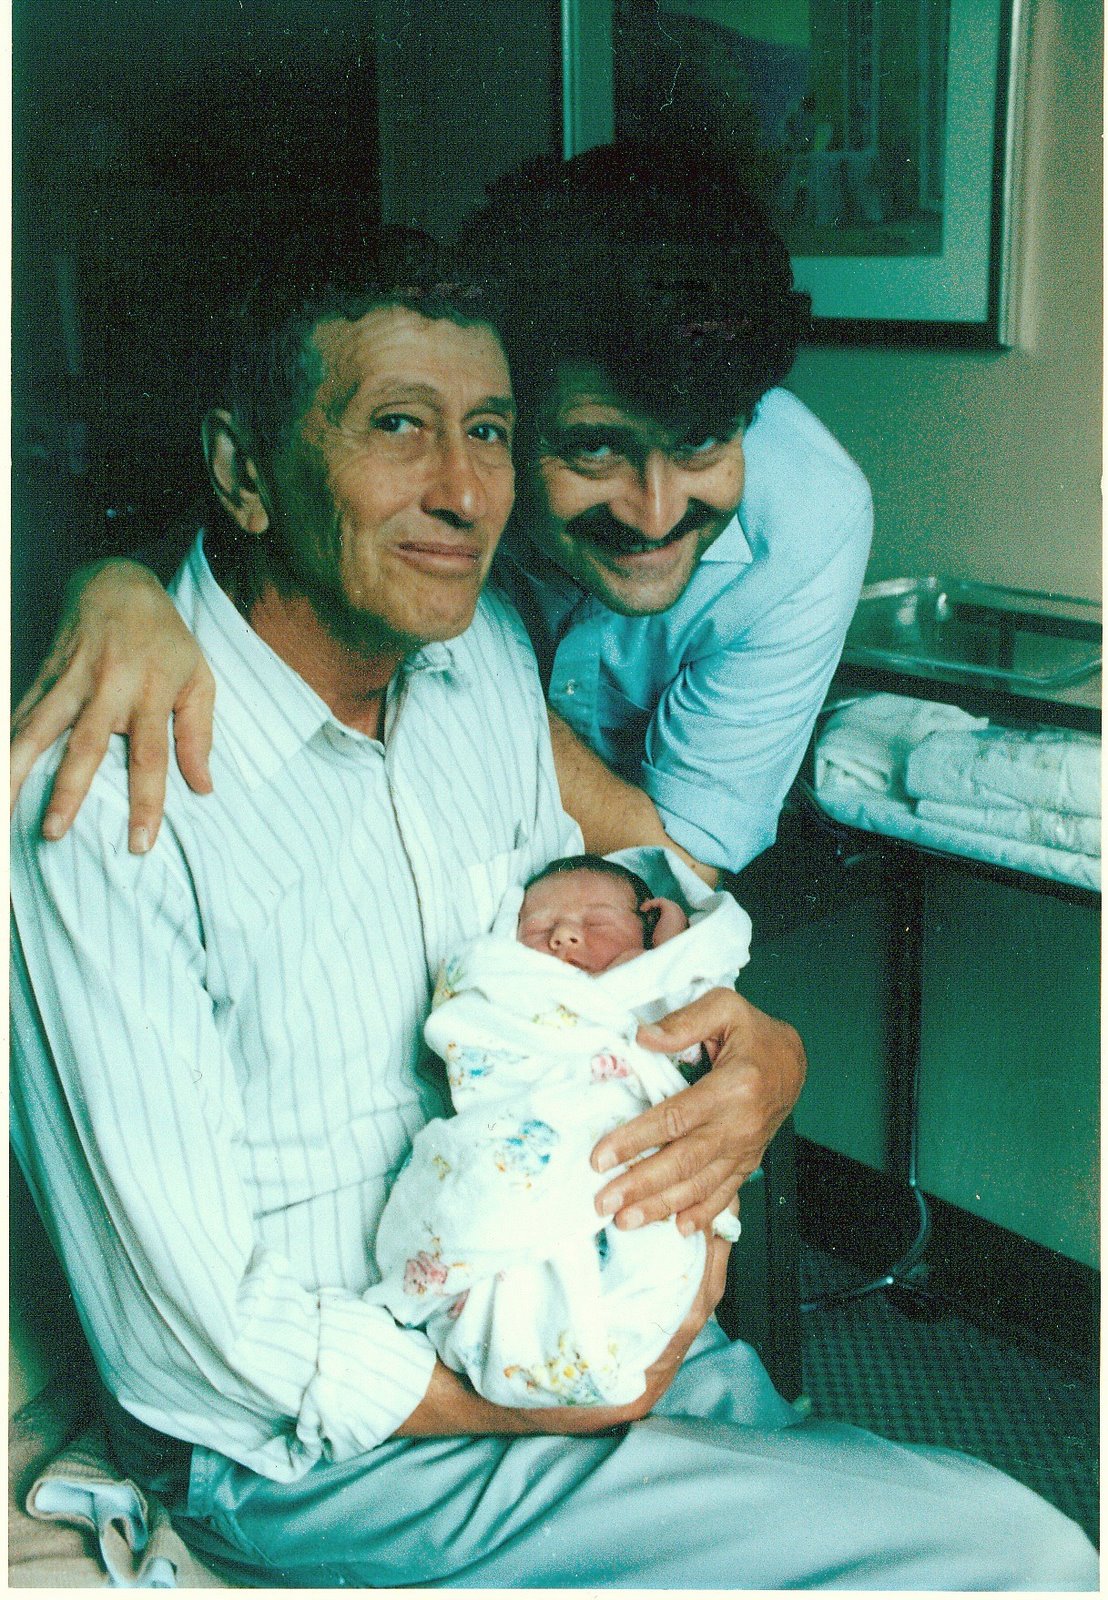 [Newborn+Danny+with+Zayde+and+Baba+in+hospital+7-31-92.jpg]